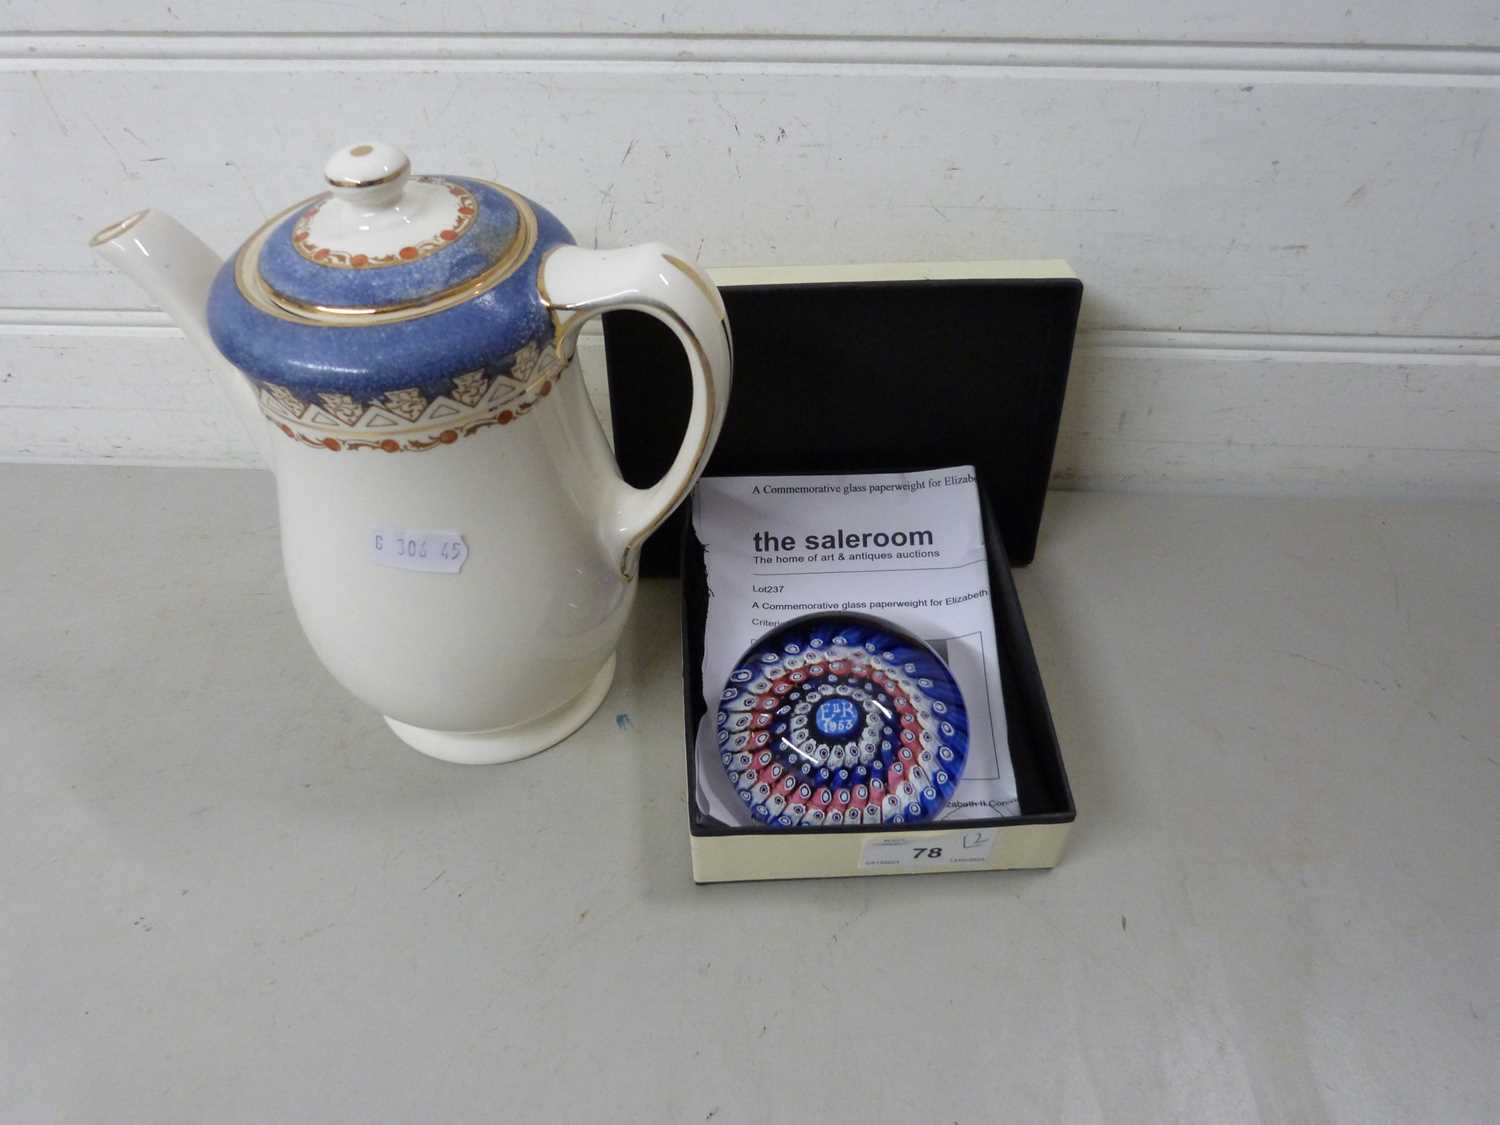 Paperweight produced to commemorate the Queen's coronation 1953 together with a Losol ware teapot